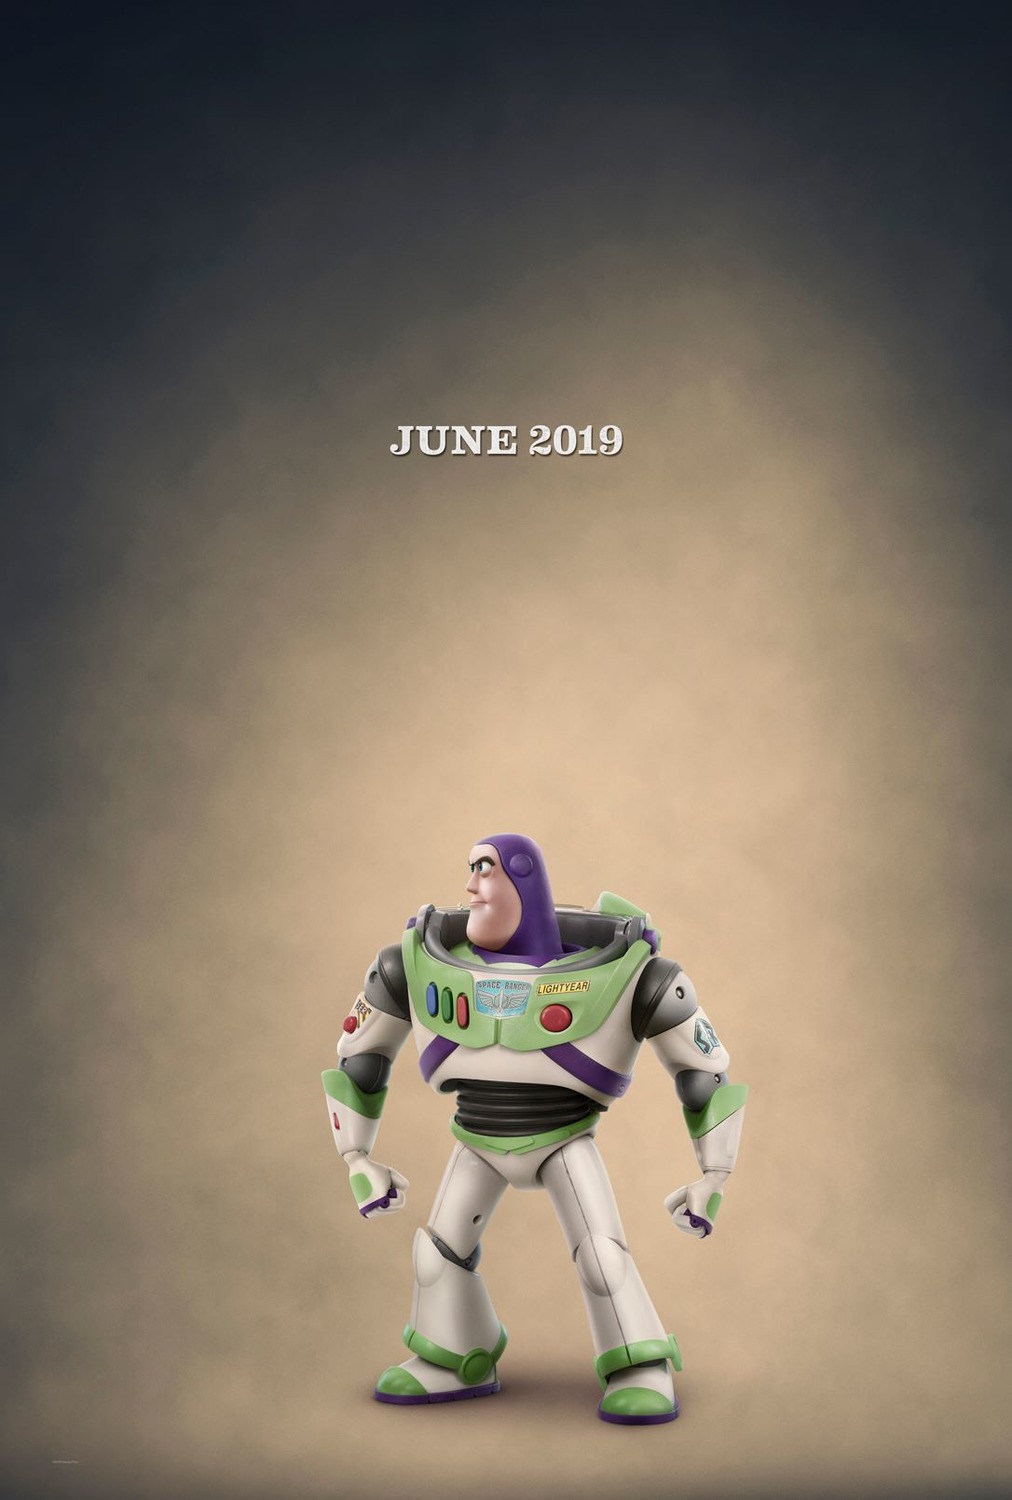 Extra Large Movie Poster Image for Toy Story 4 (#2 of 29)